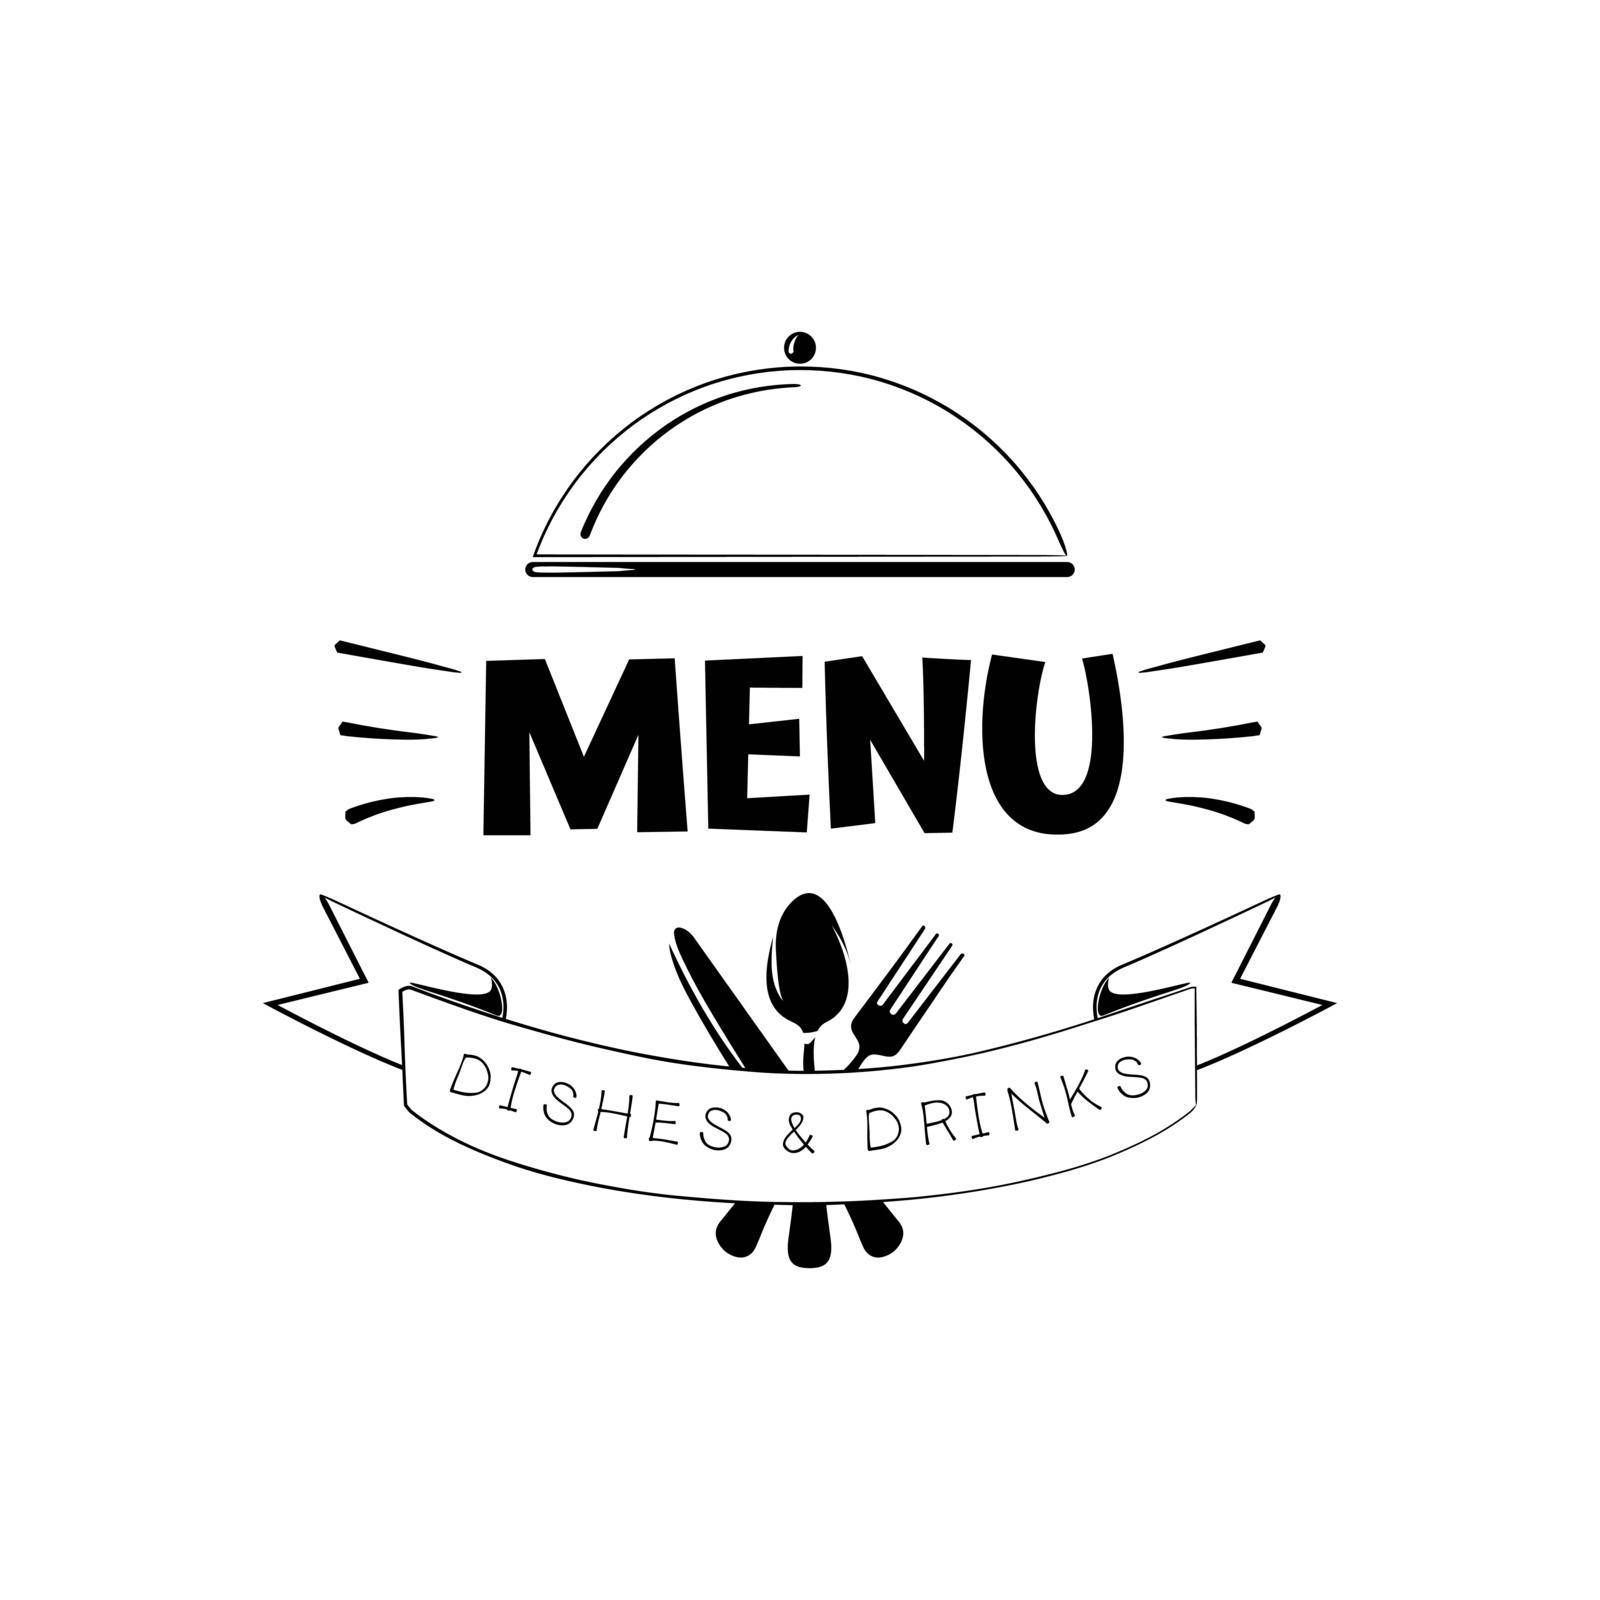 Logo of the restaurant or cafe menu. Isolated on a white background.